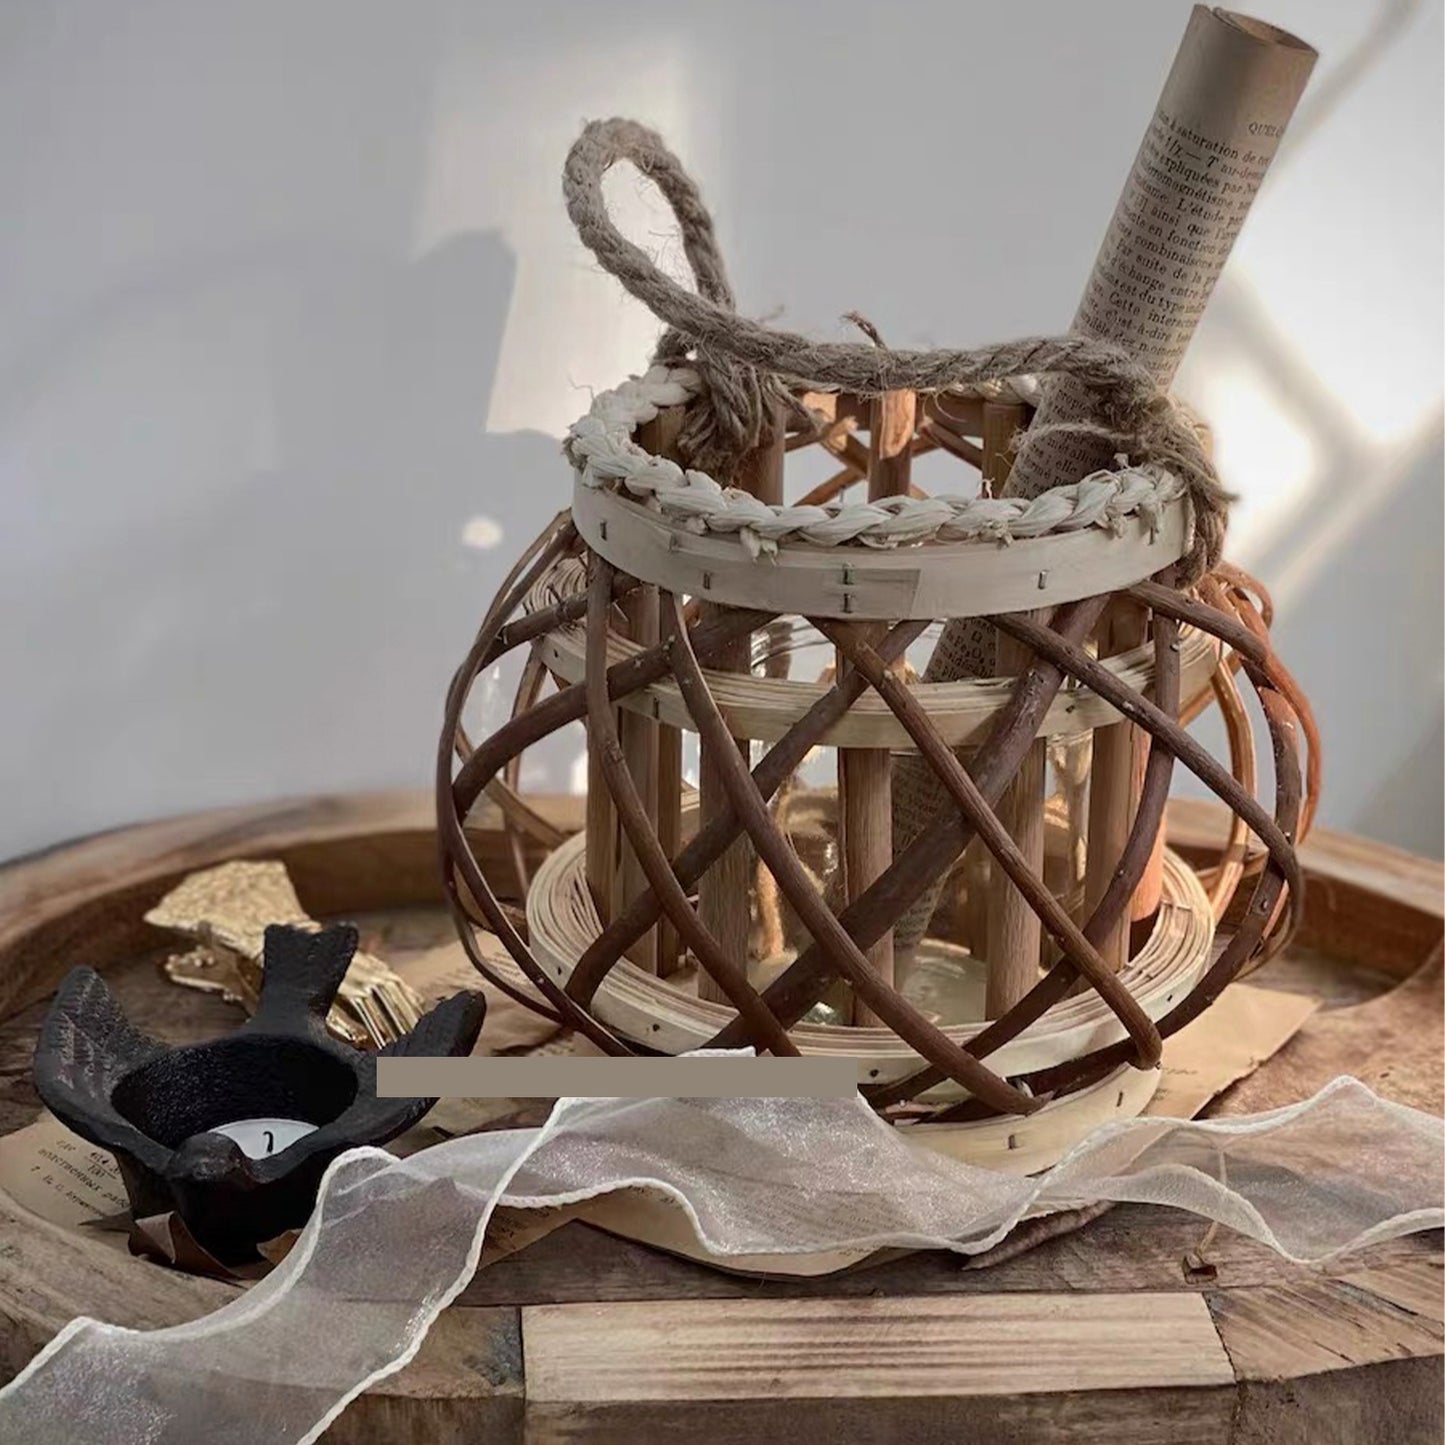 Wicker-woven Candle Holder